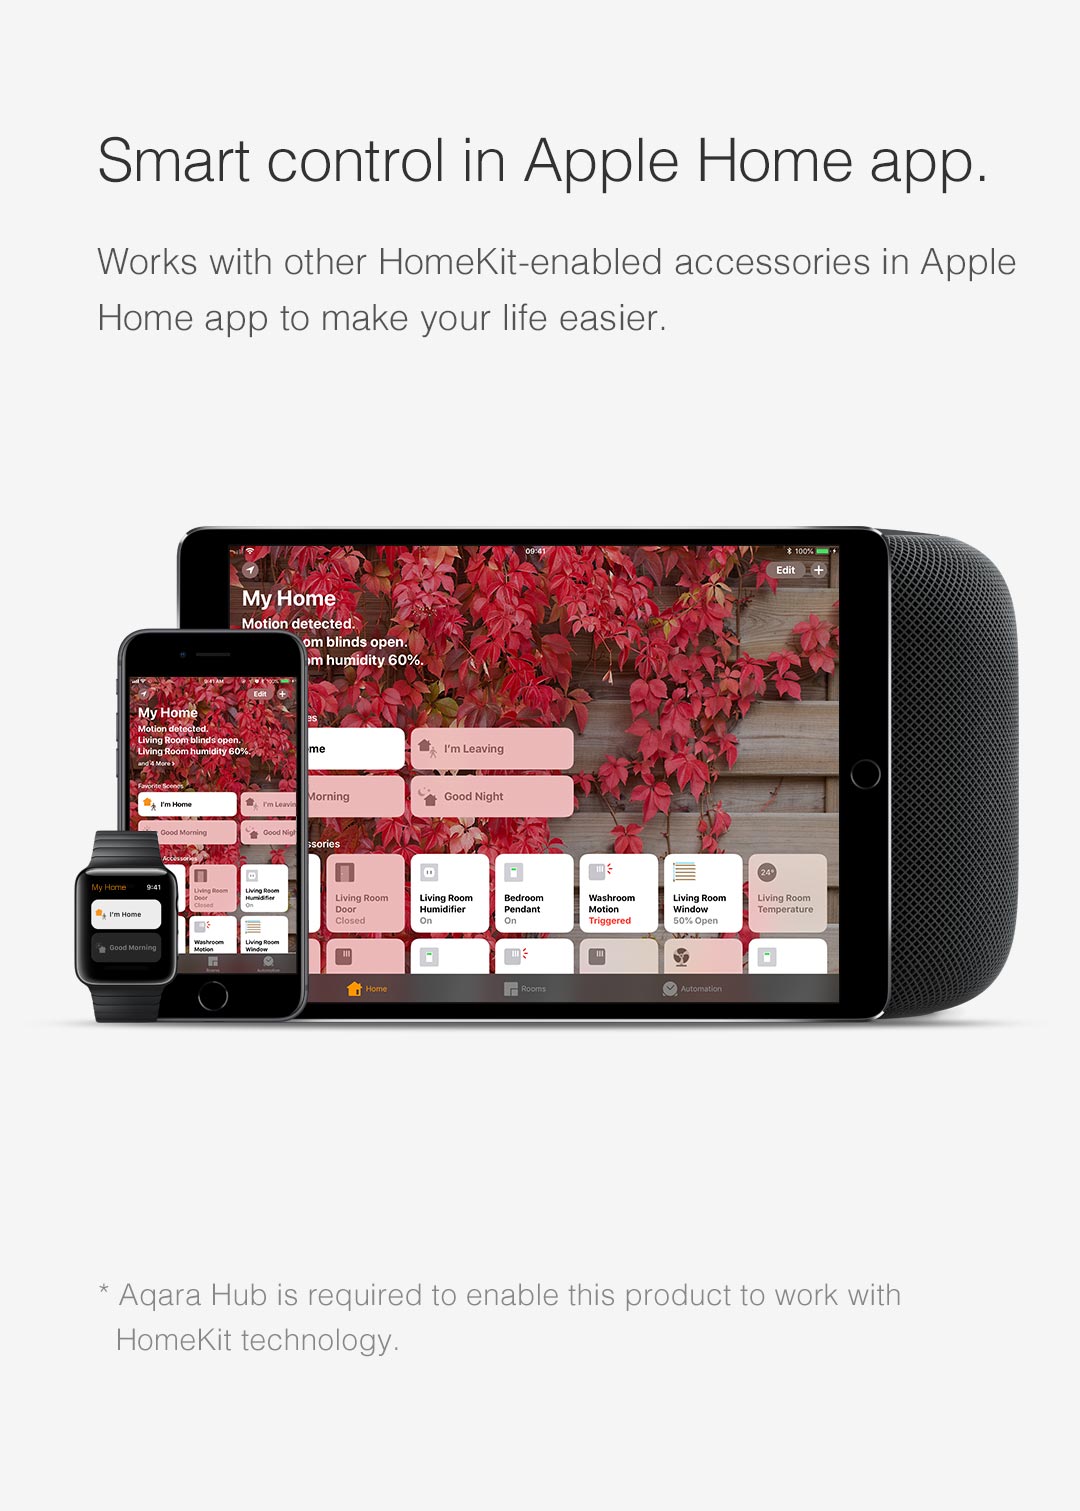 Aqara motion sensor works with other HomeKit-enabled accessories in Apple Home app